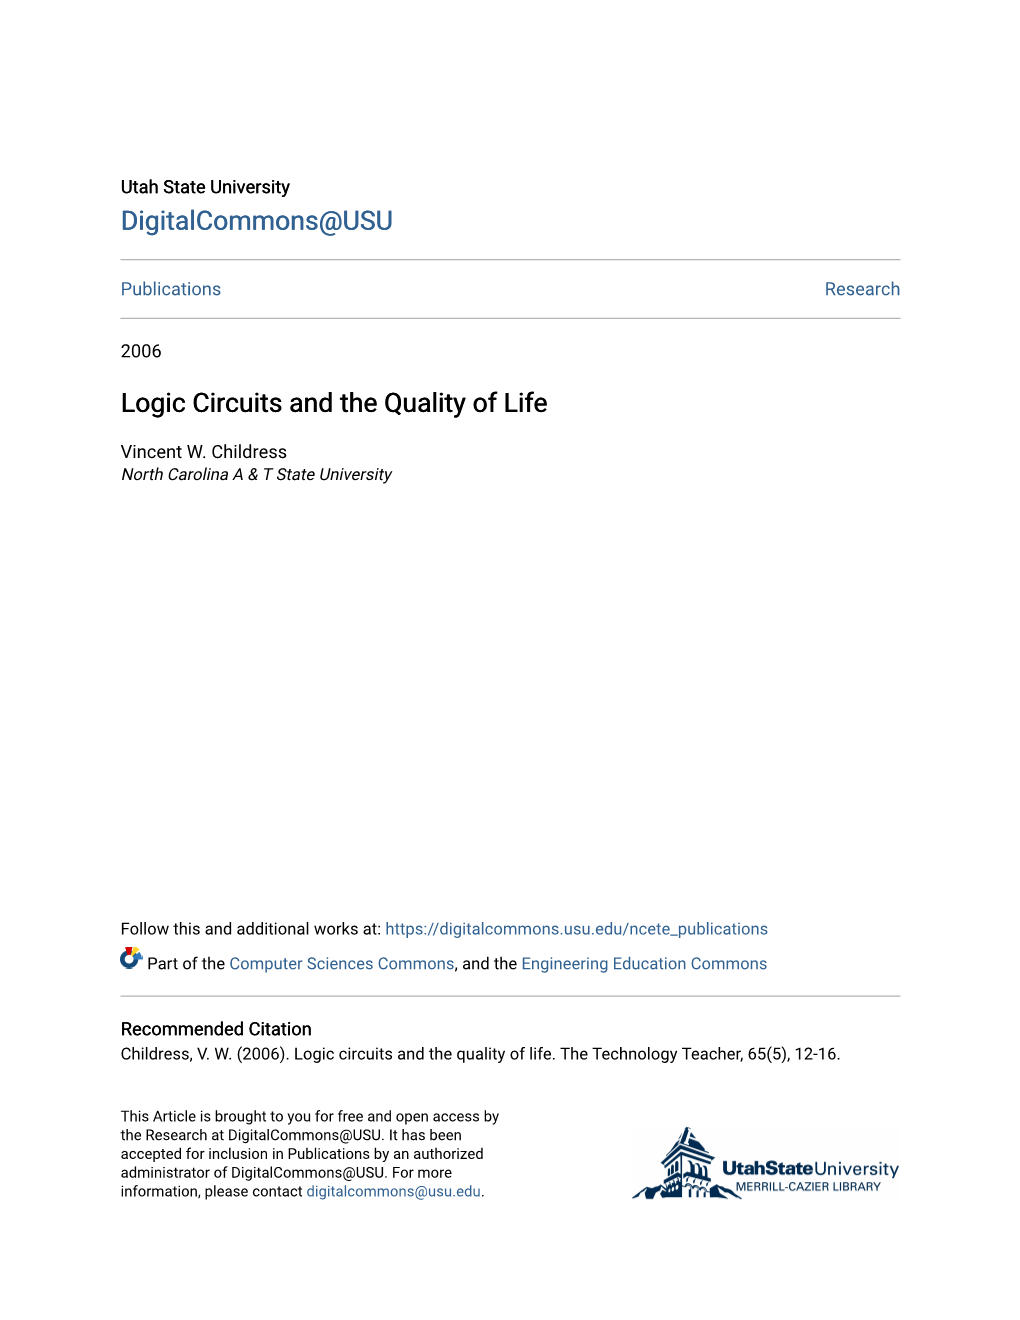 Logic Circuits and the Quality of Life